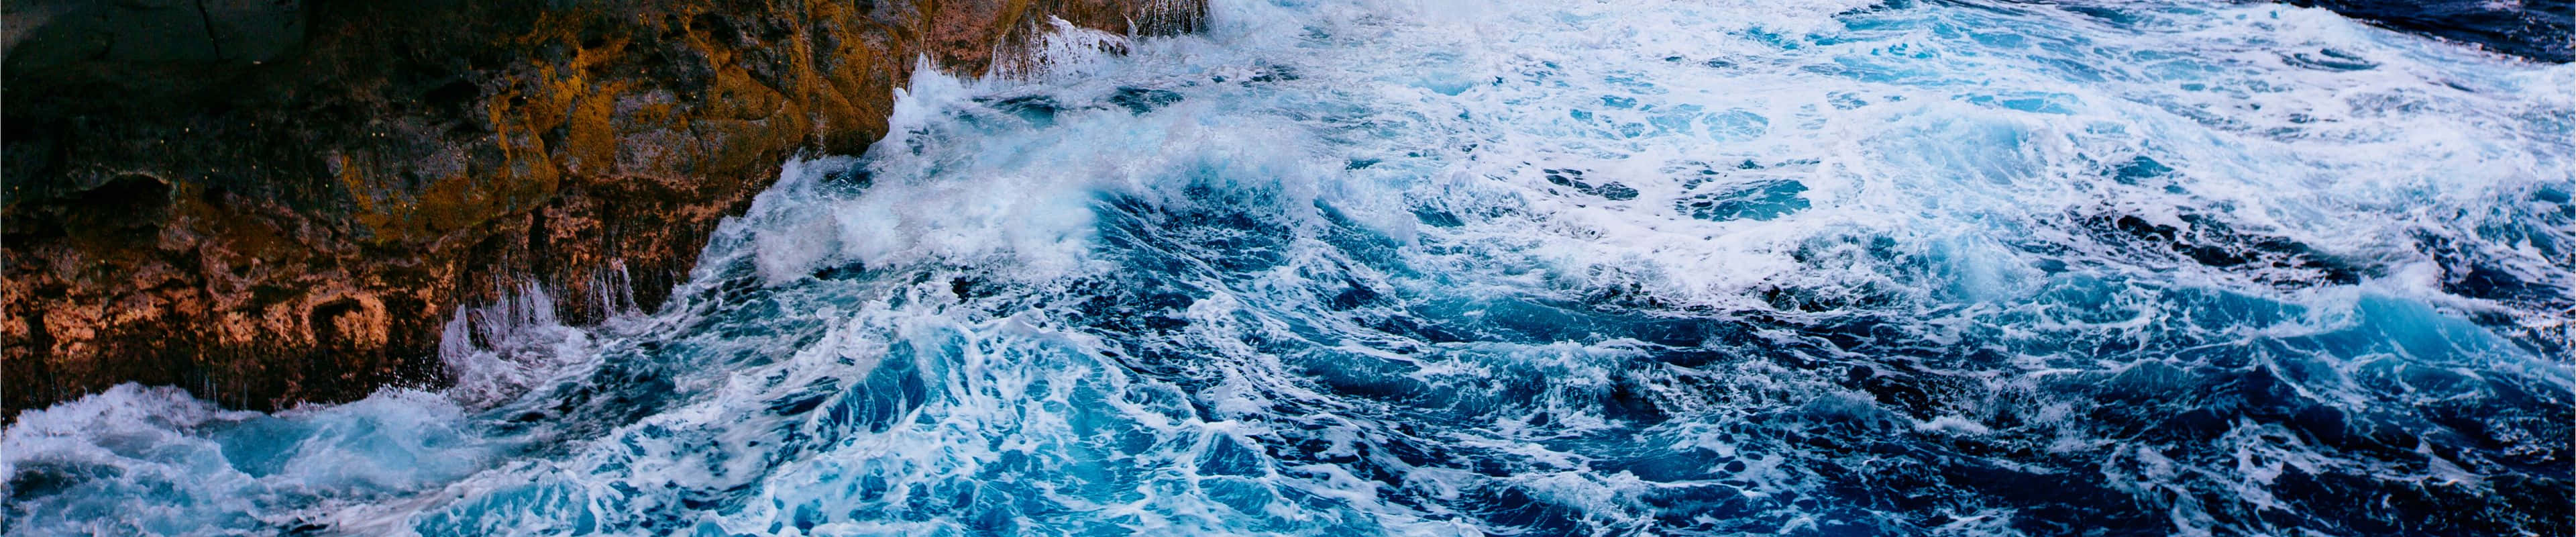 A Blue Ocean With Waves Crashing Over Rocks Wallpaper